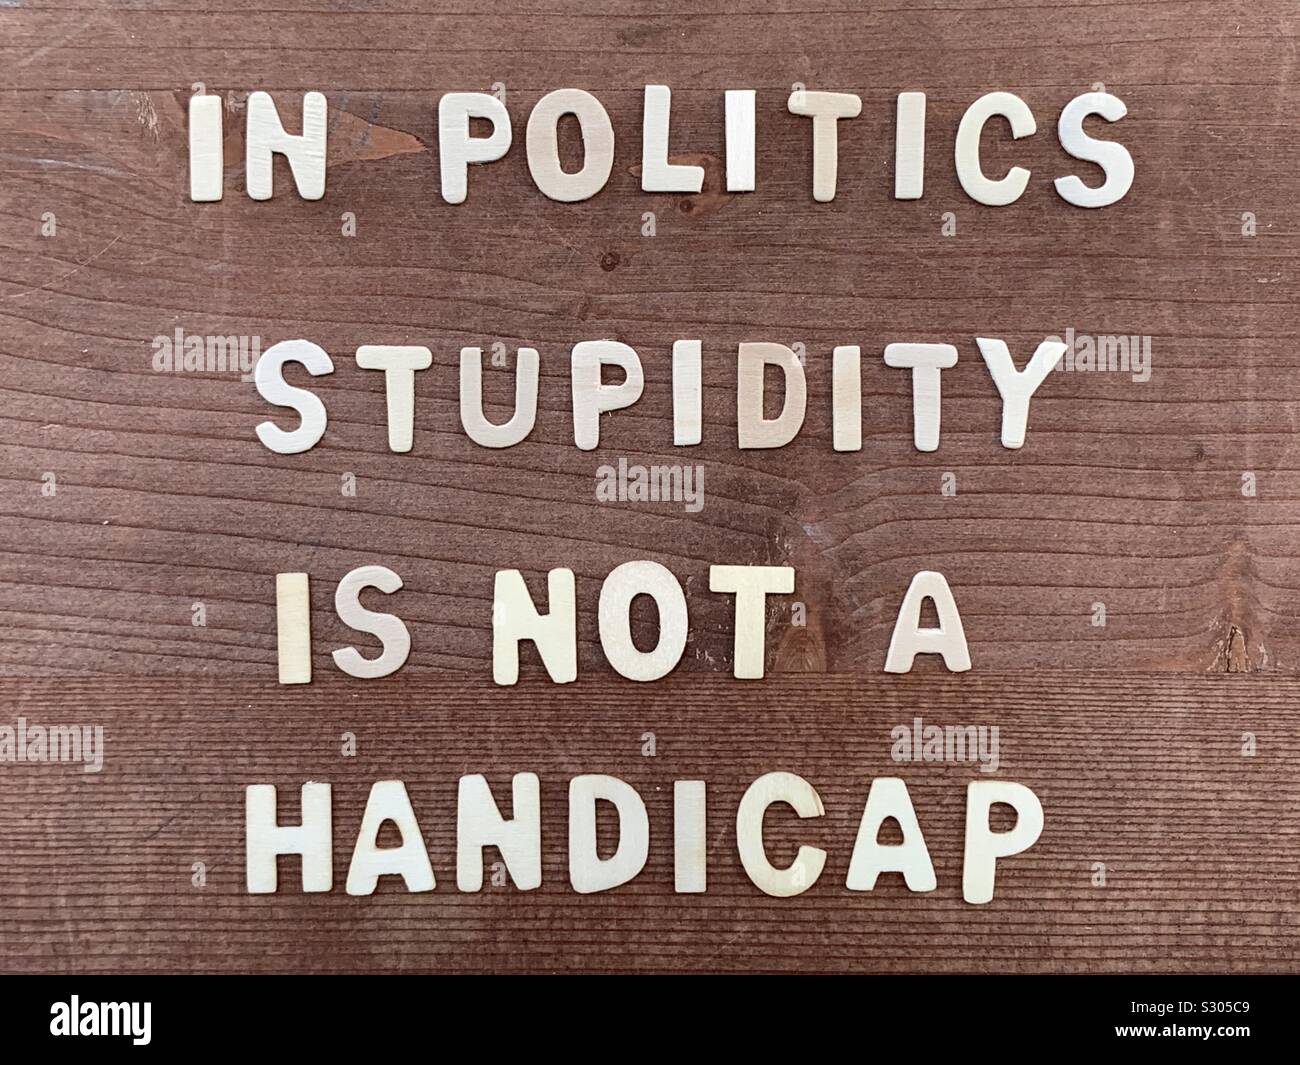 In politics stupidity is not a handicap, famous quote composed with wooden letters Stock Photo